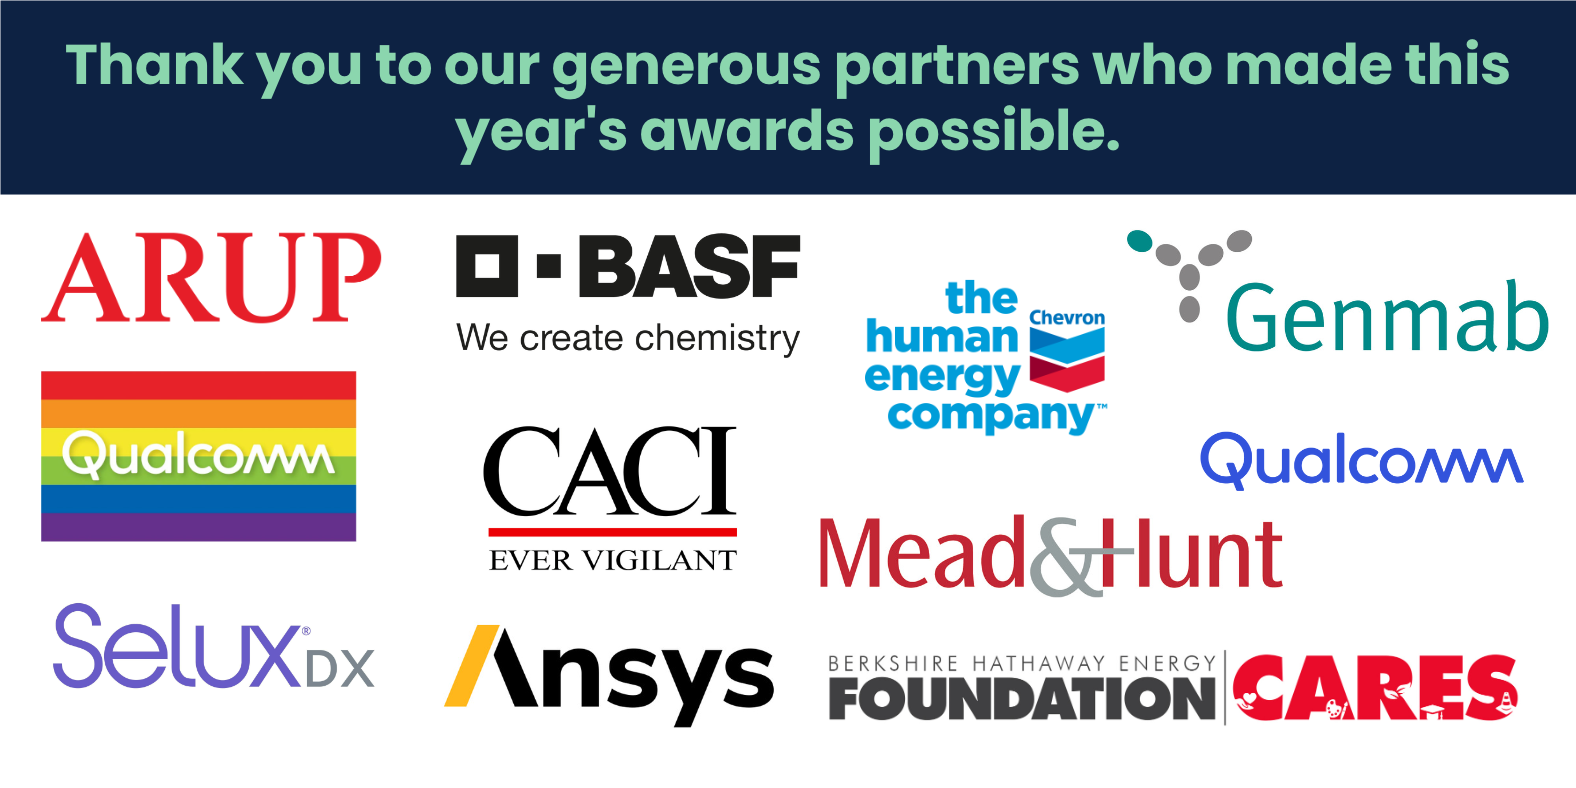 Thank you to our generous partners who made this year's awards possible. [Images of the sponsor logos are arranged] 